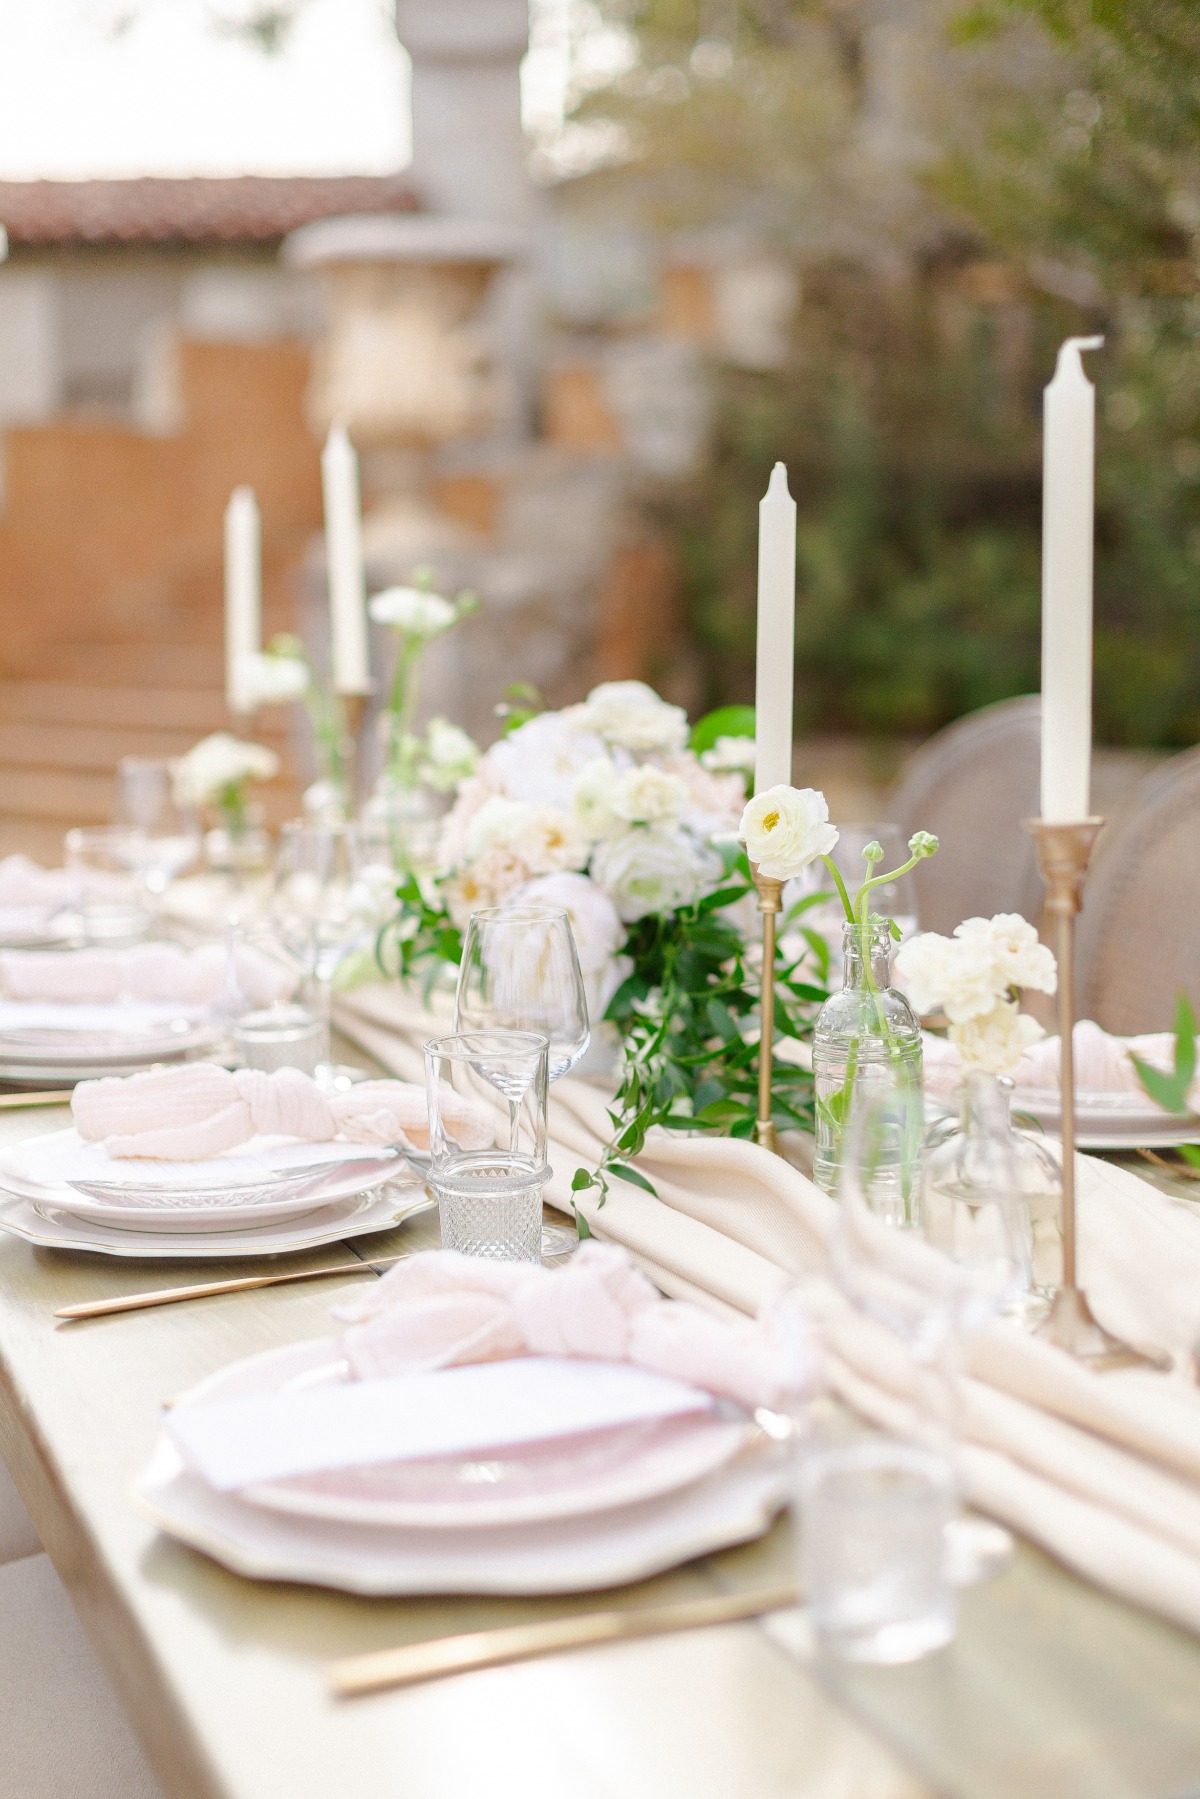 How To Create The Wedding You Want...Wherever You Are